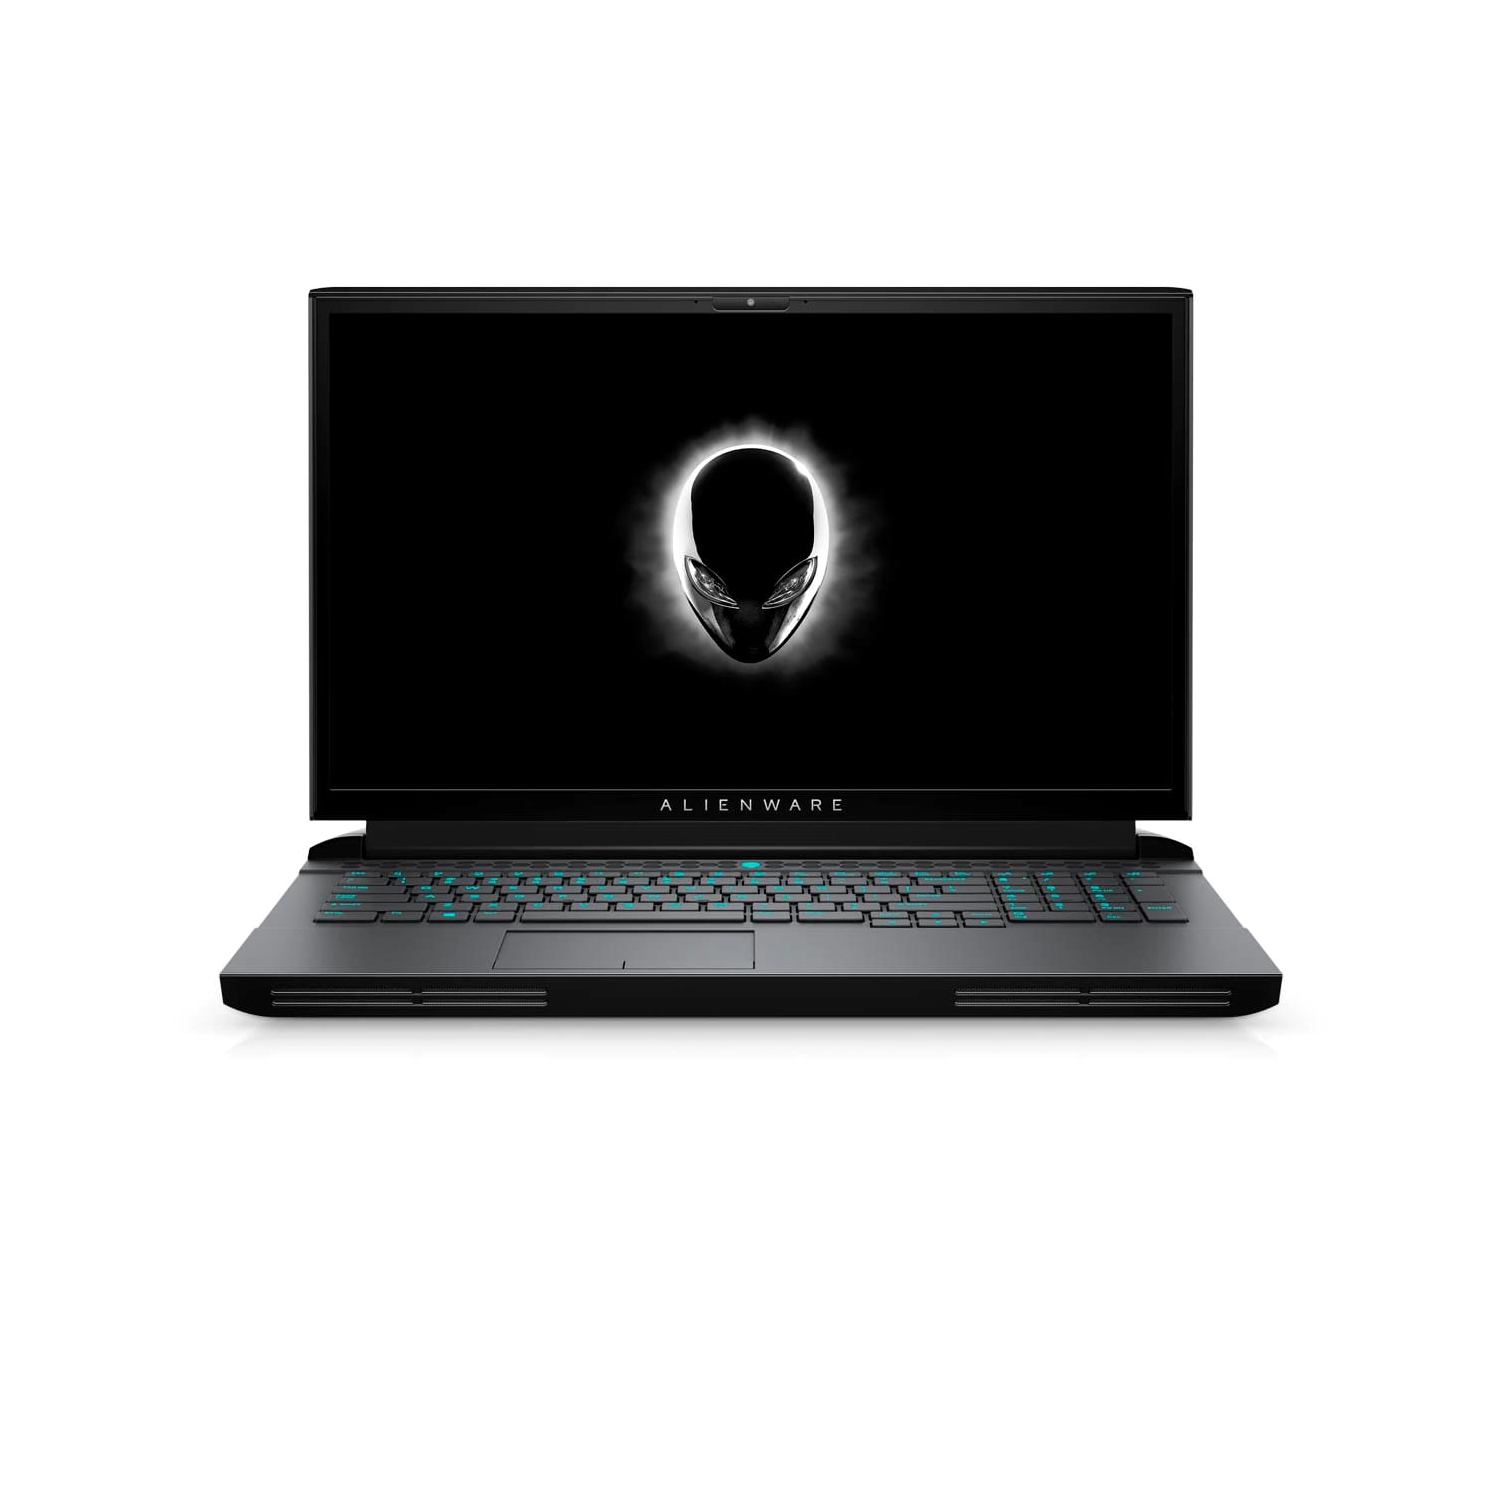 Refurbished (Excellent) - Dell Alienware 17 51m R2 Gaming Laptop (2020), 17.3" FHD, Core i7, 512GB SSD + 512GB SSD, 16GB RAM, RTX 2060, 4.8 GHz, 10th Gen CPU Certified